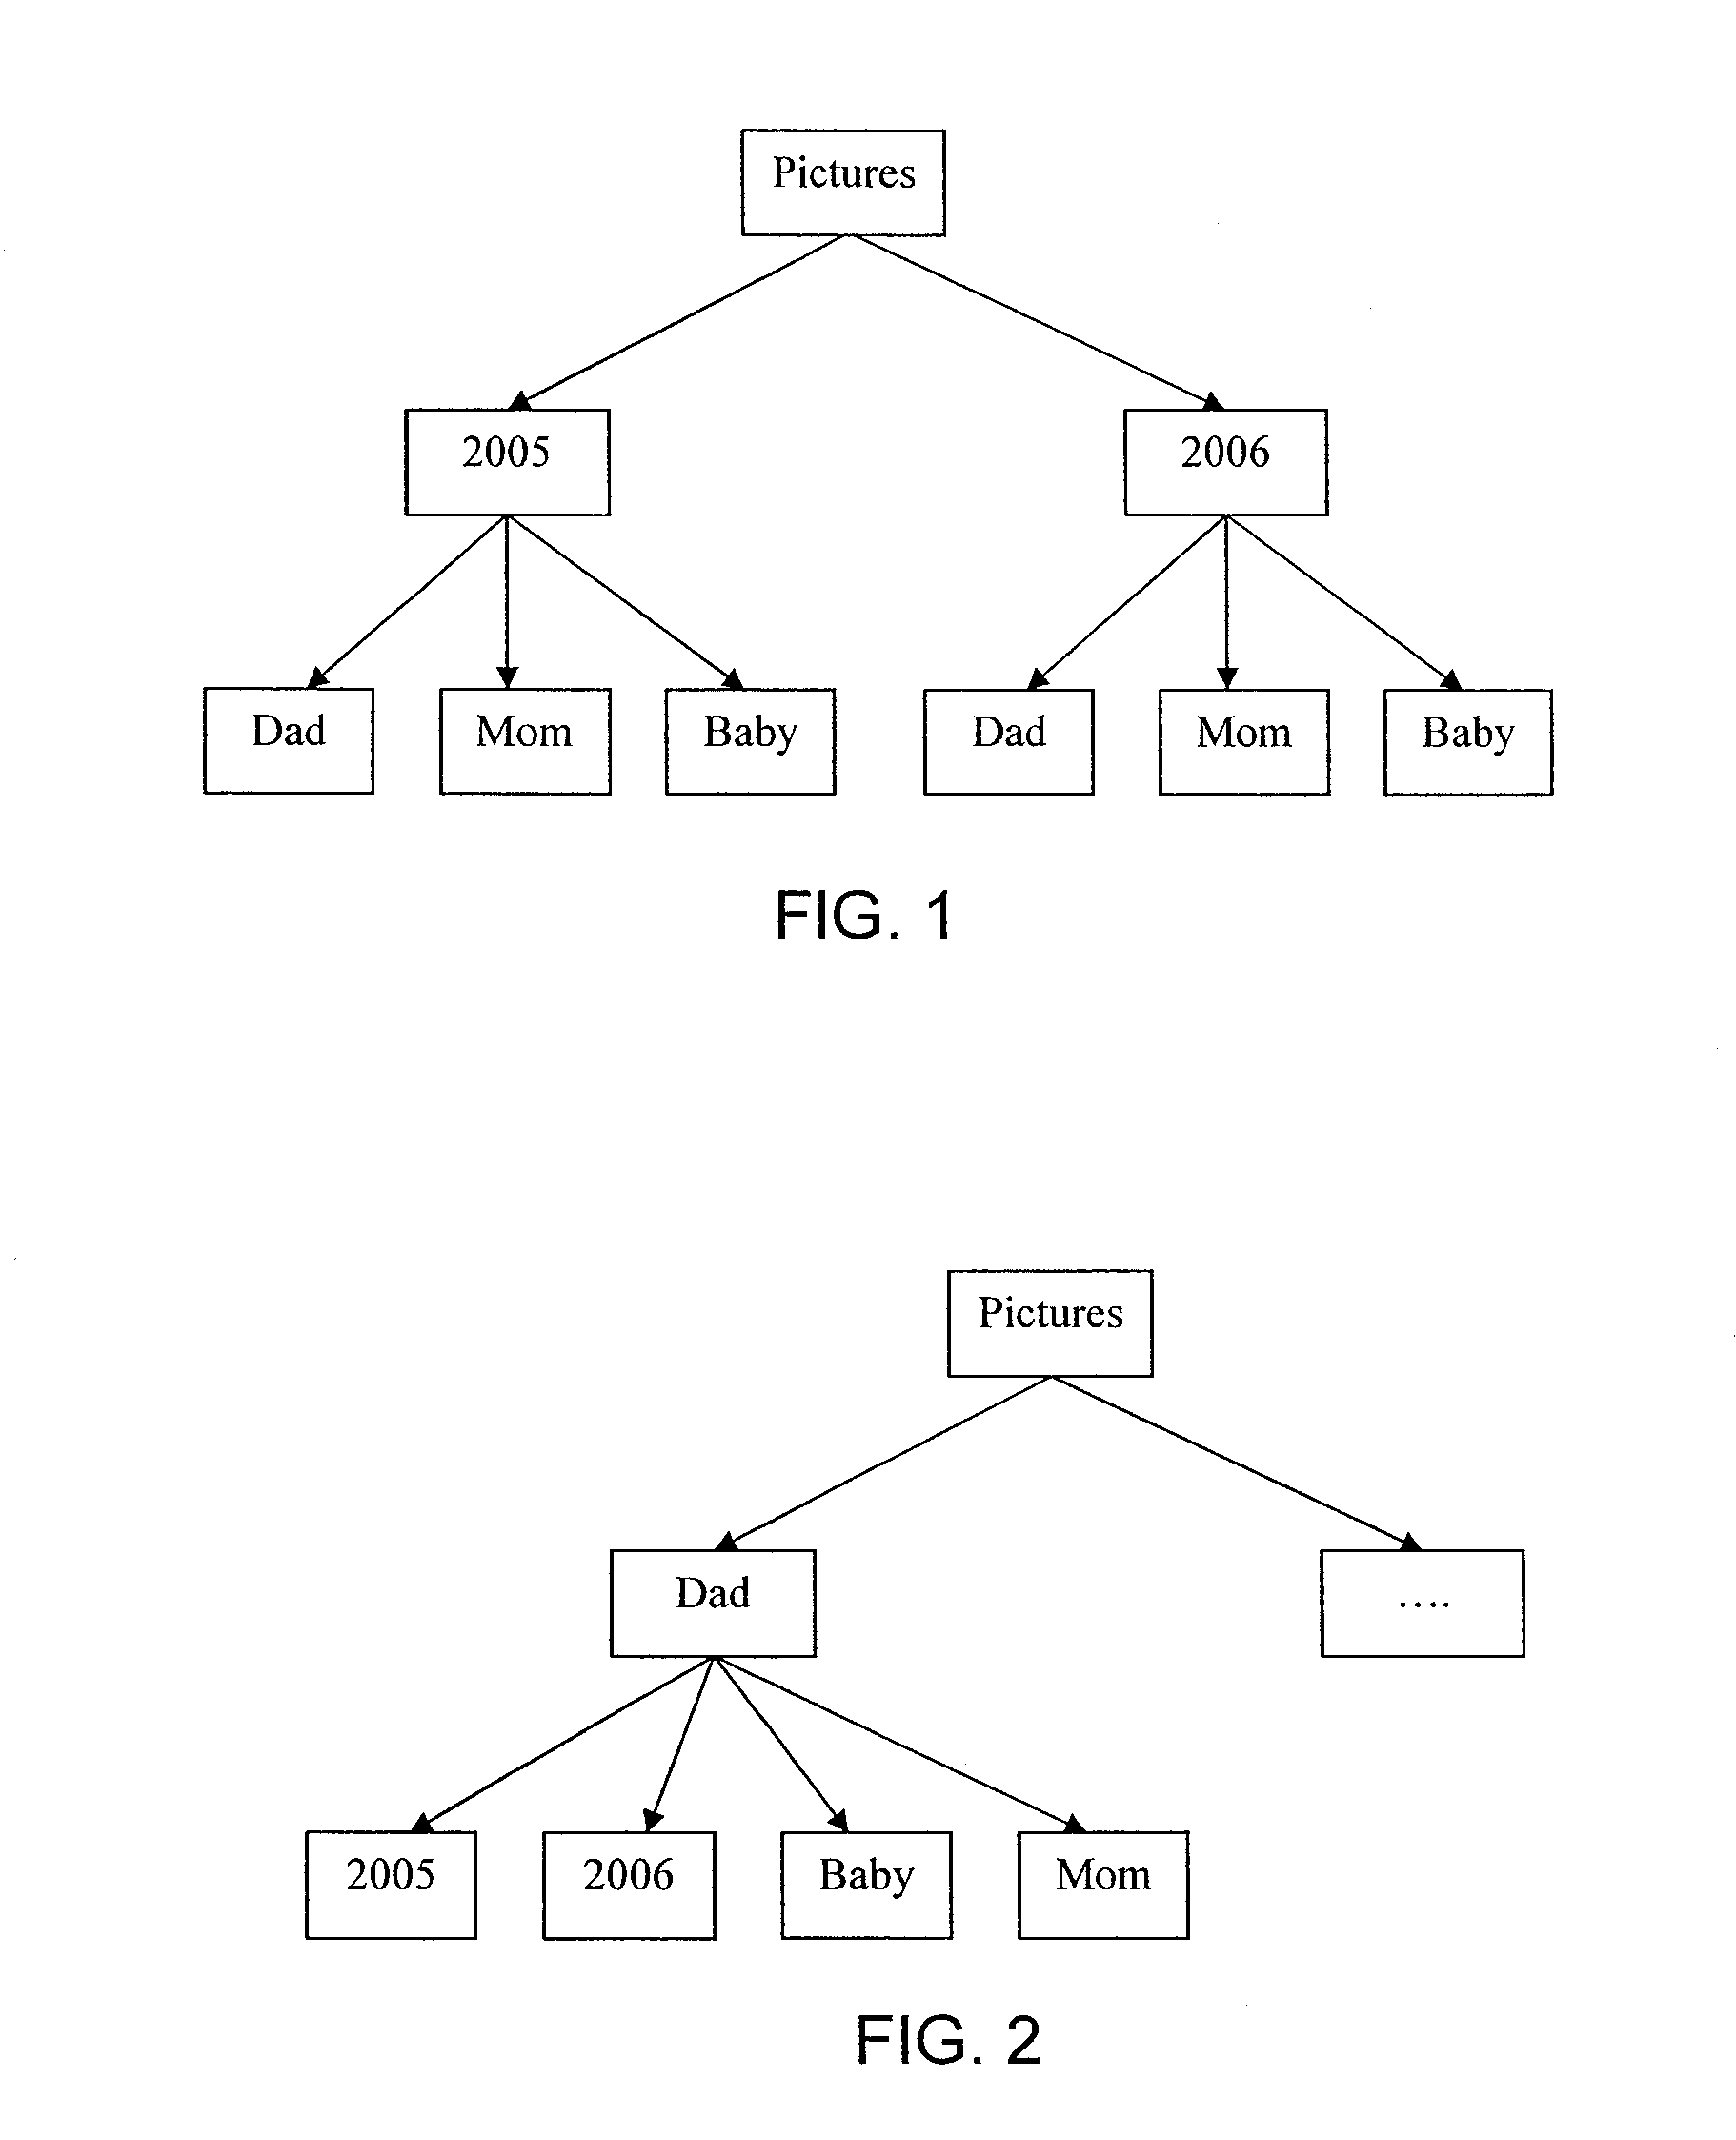 Hierarchical structured abstract data organization system